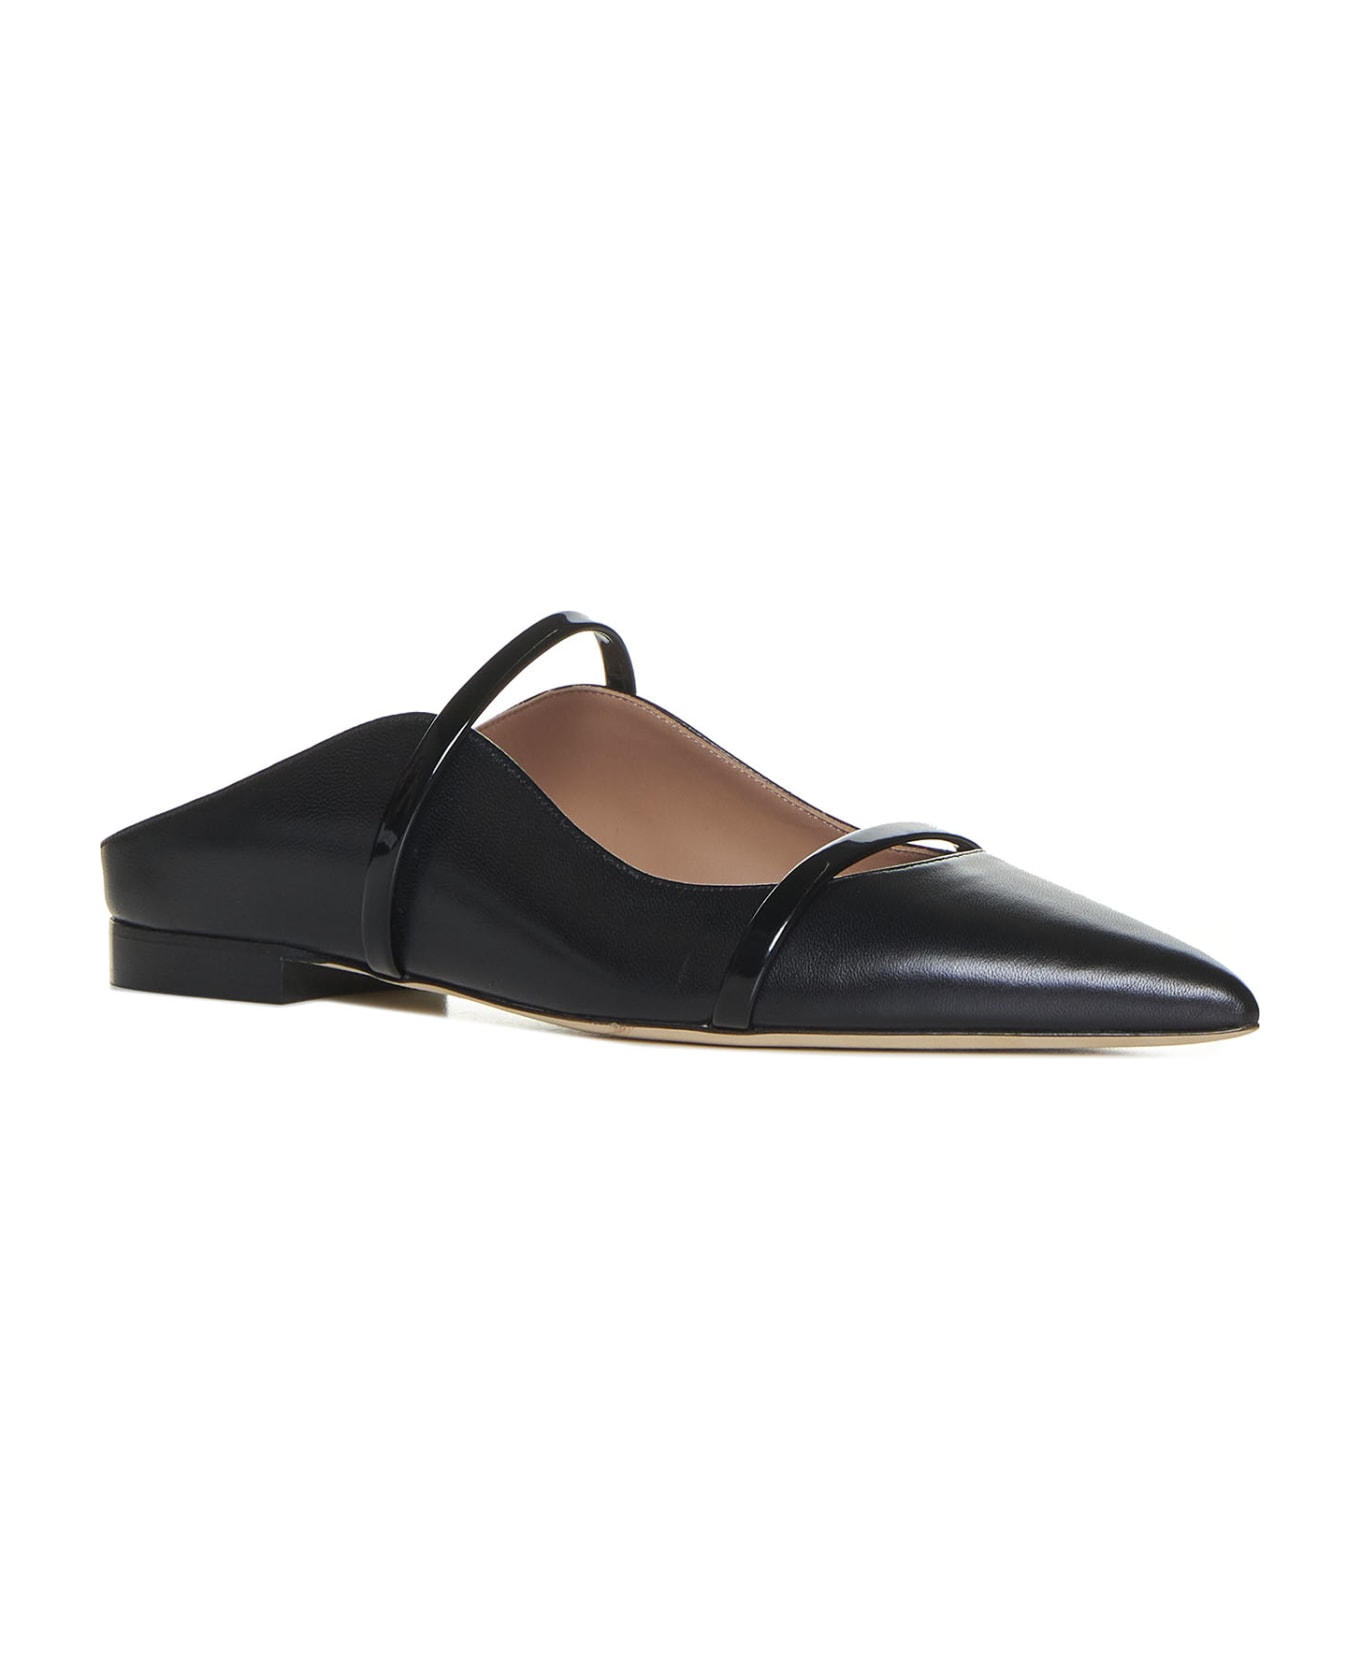 Malone Souliers Sandals - Black